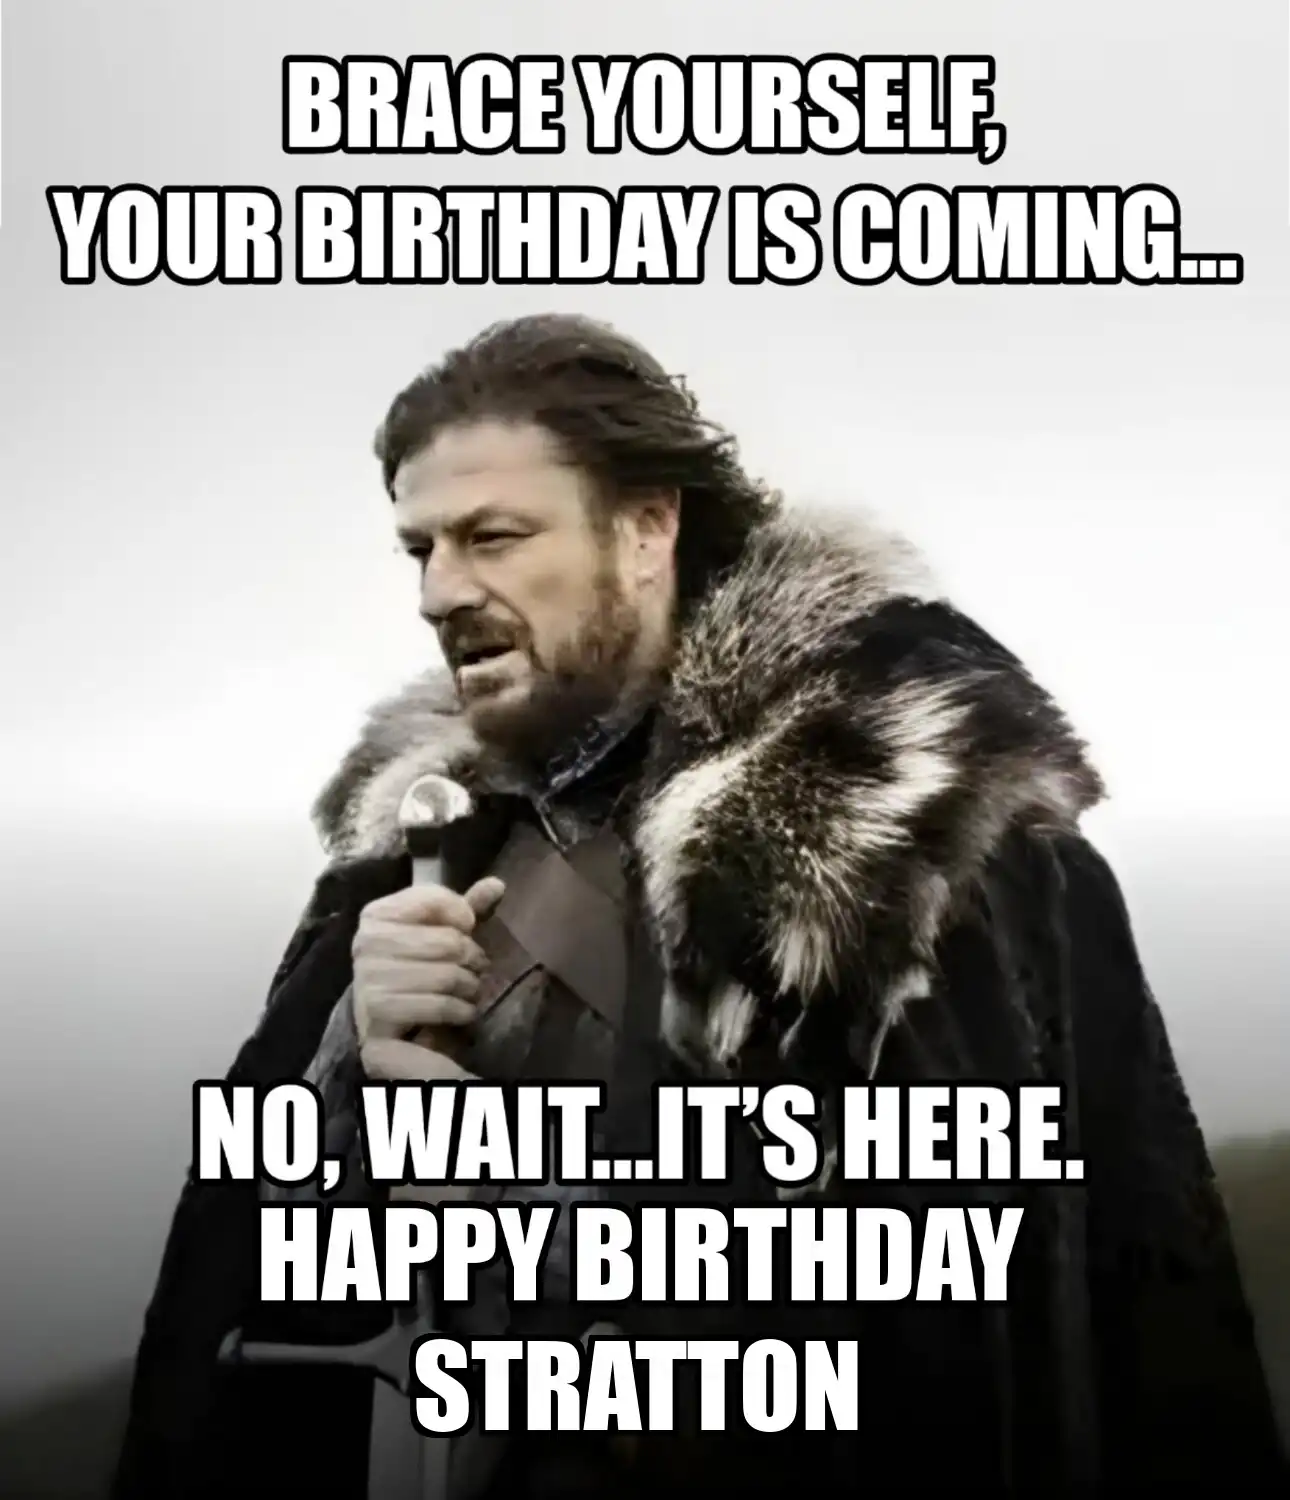 Happy Birthday Stratton Brace Yourself Your Birthday Is Coming Meme